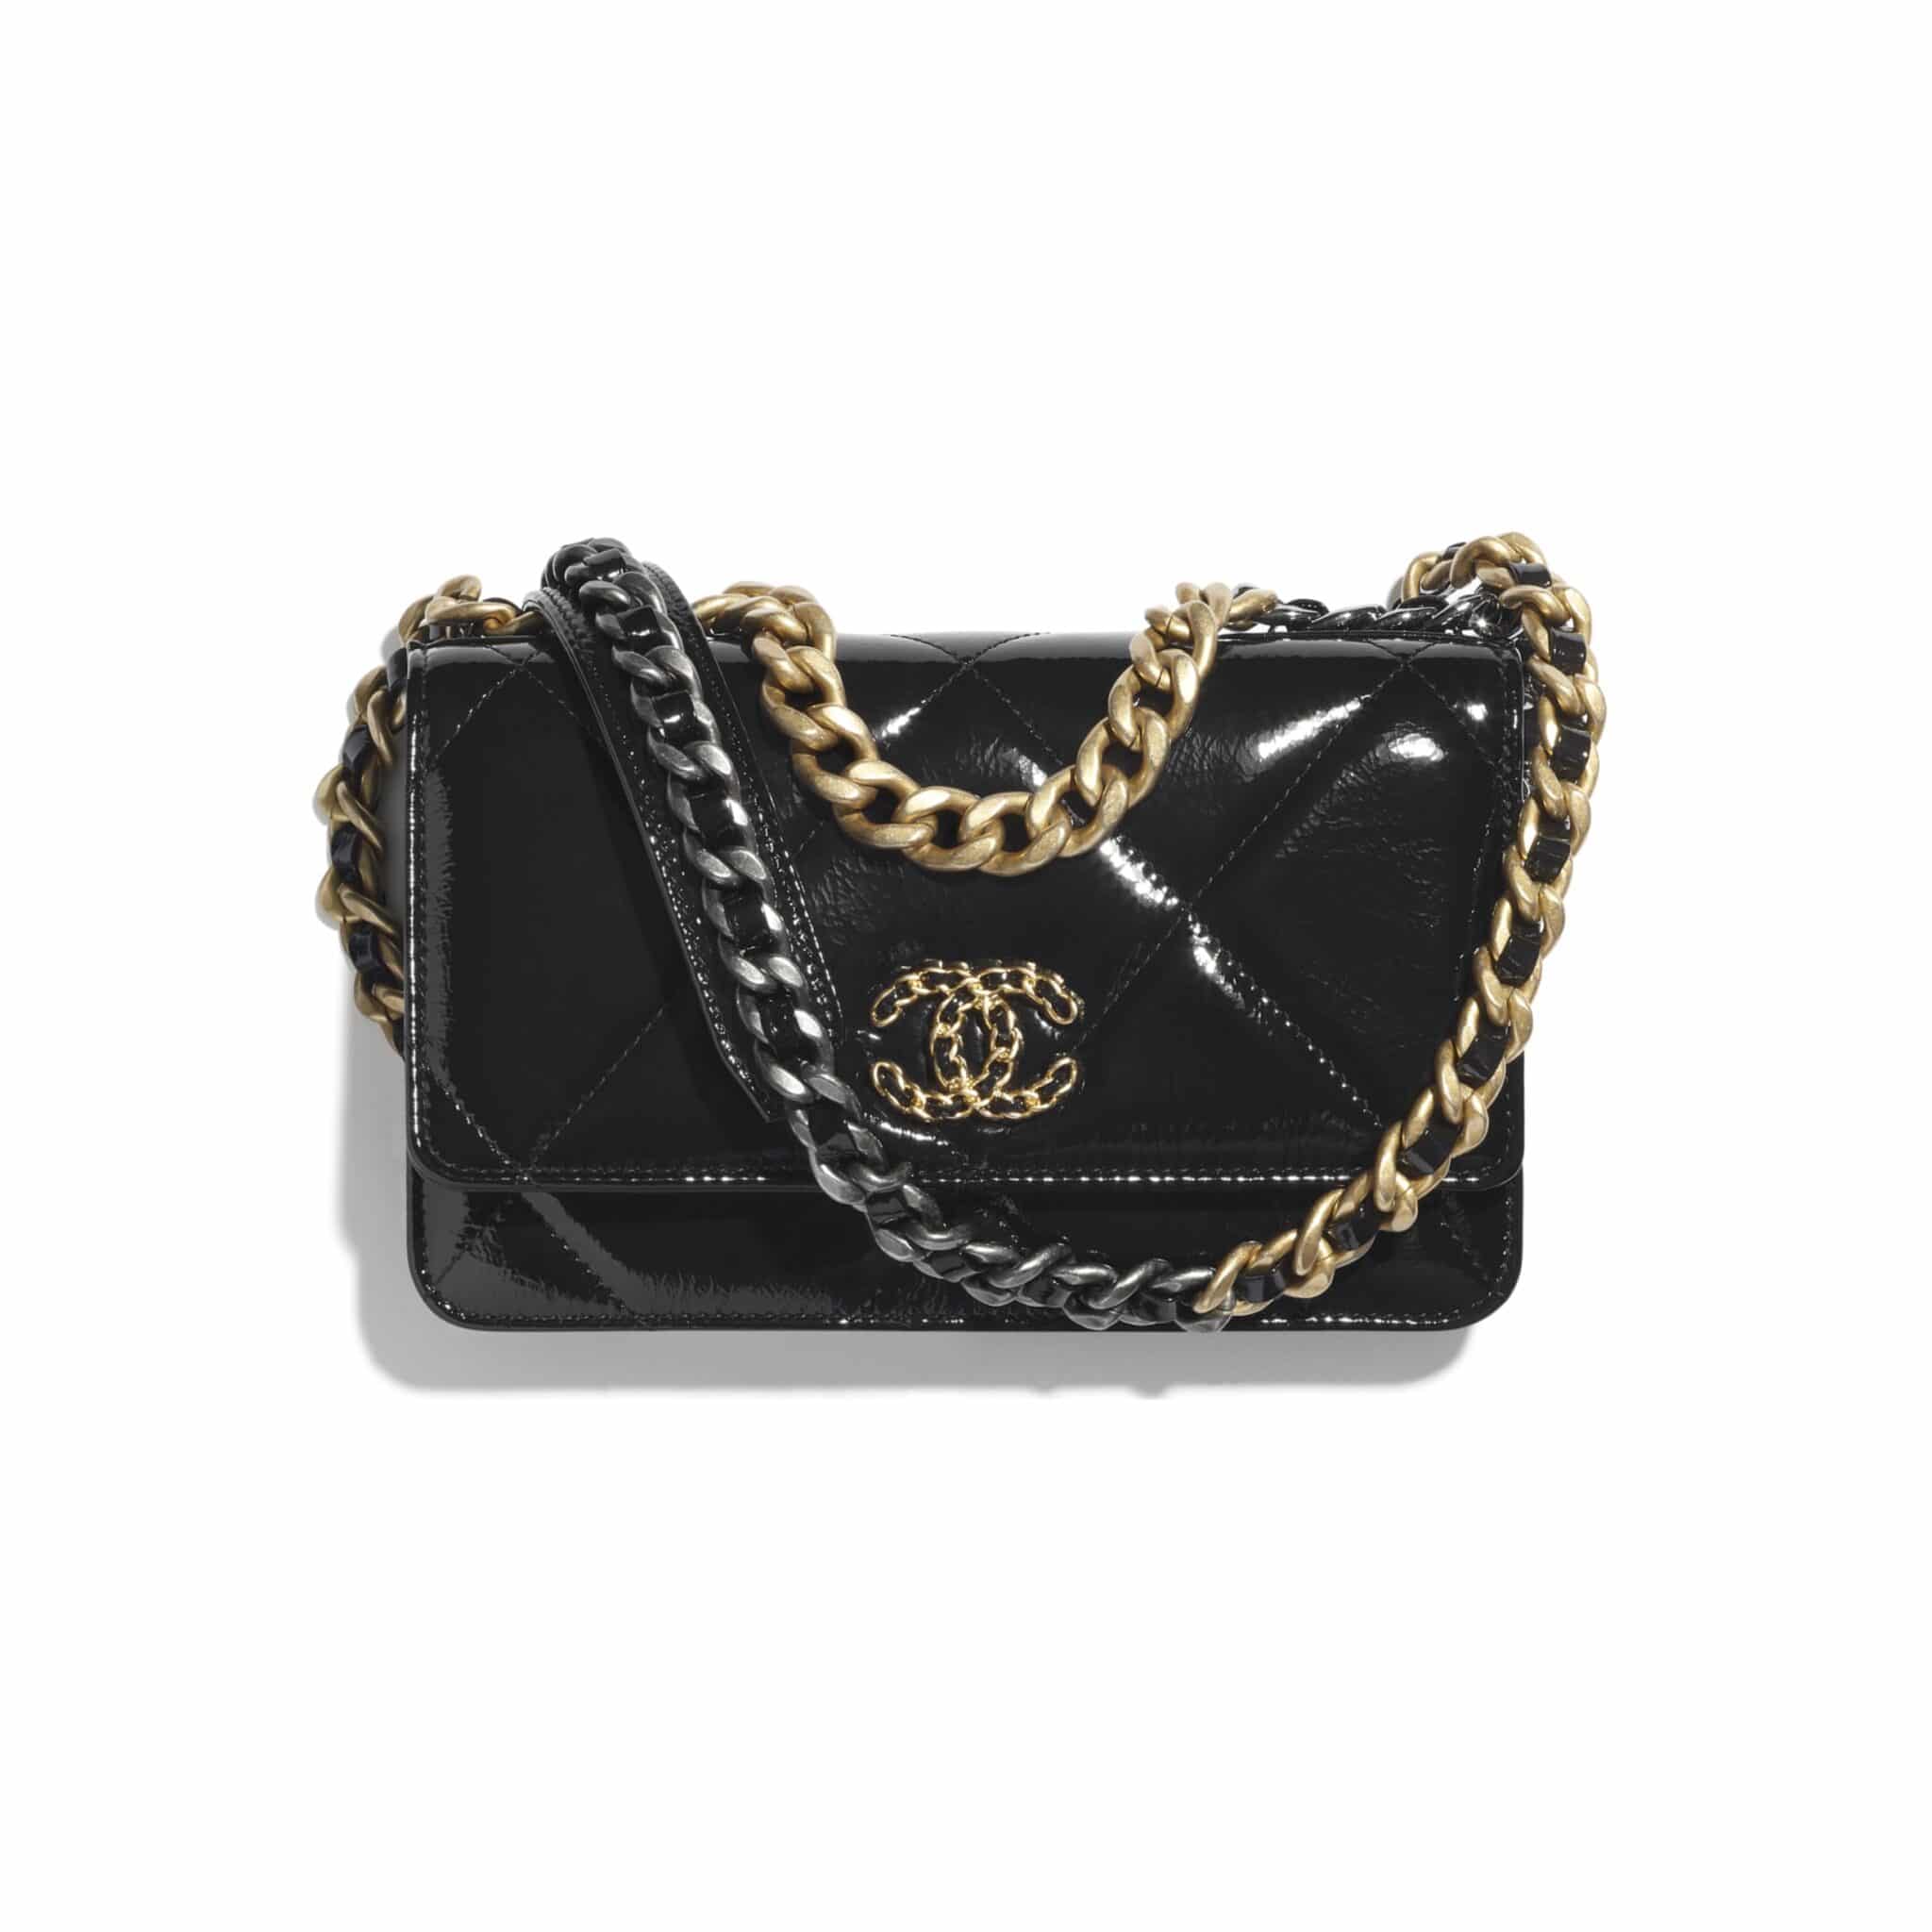 Card Holders - Small leather goods — Fashion, CHANEL